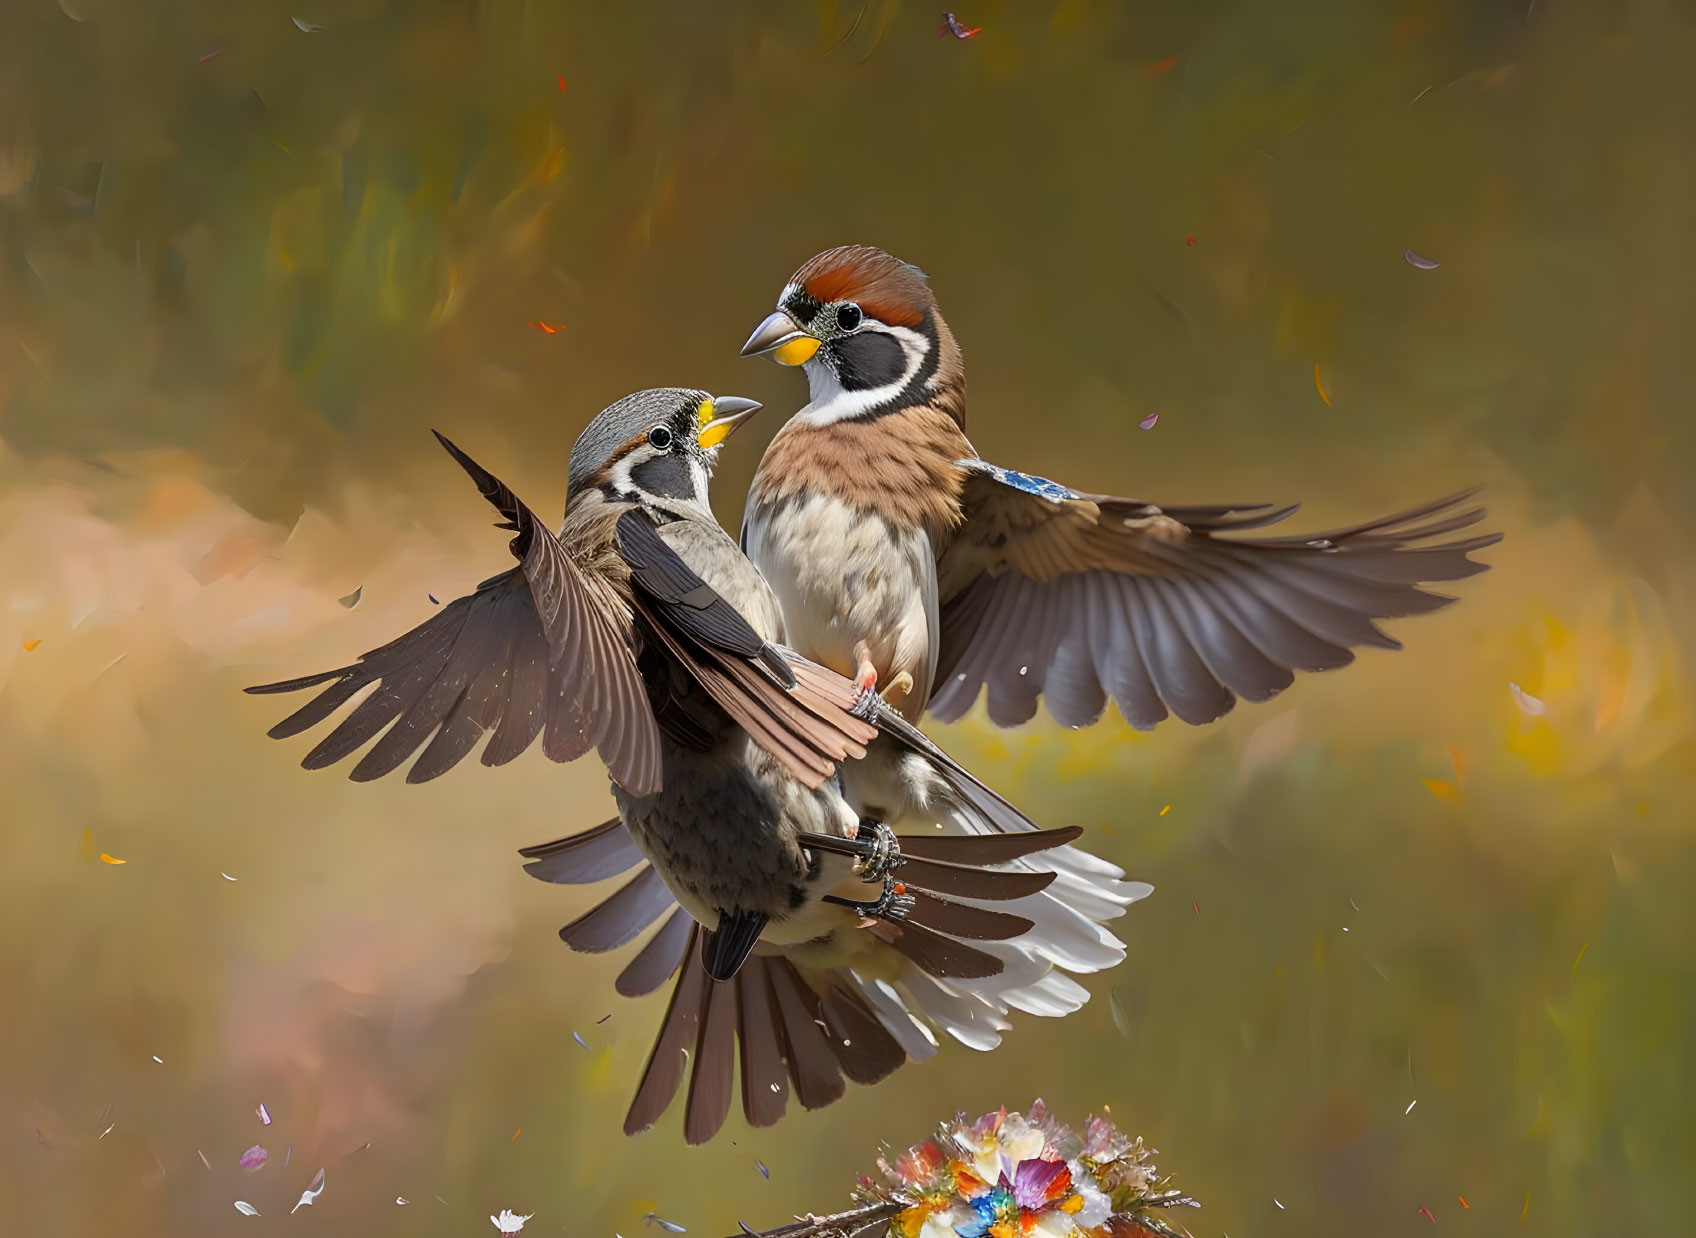 Sparrows in flight interacting in autumn scenery